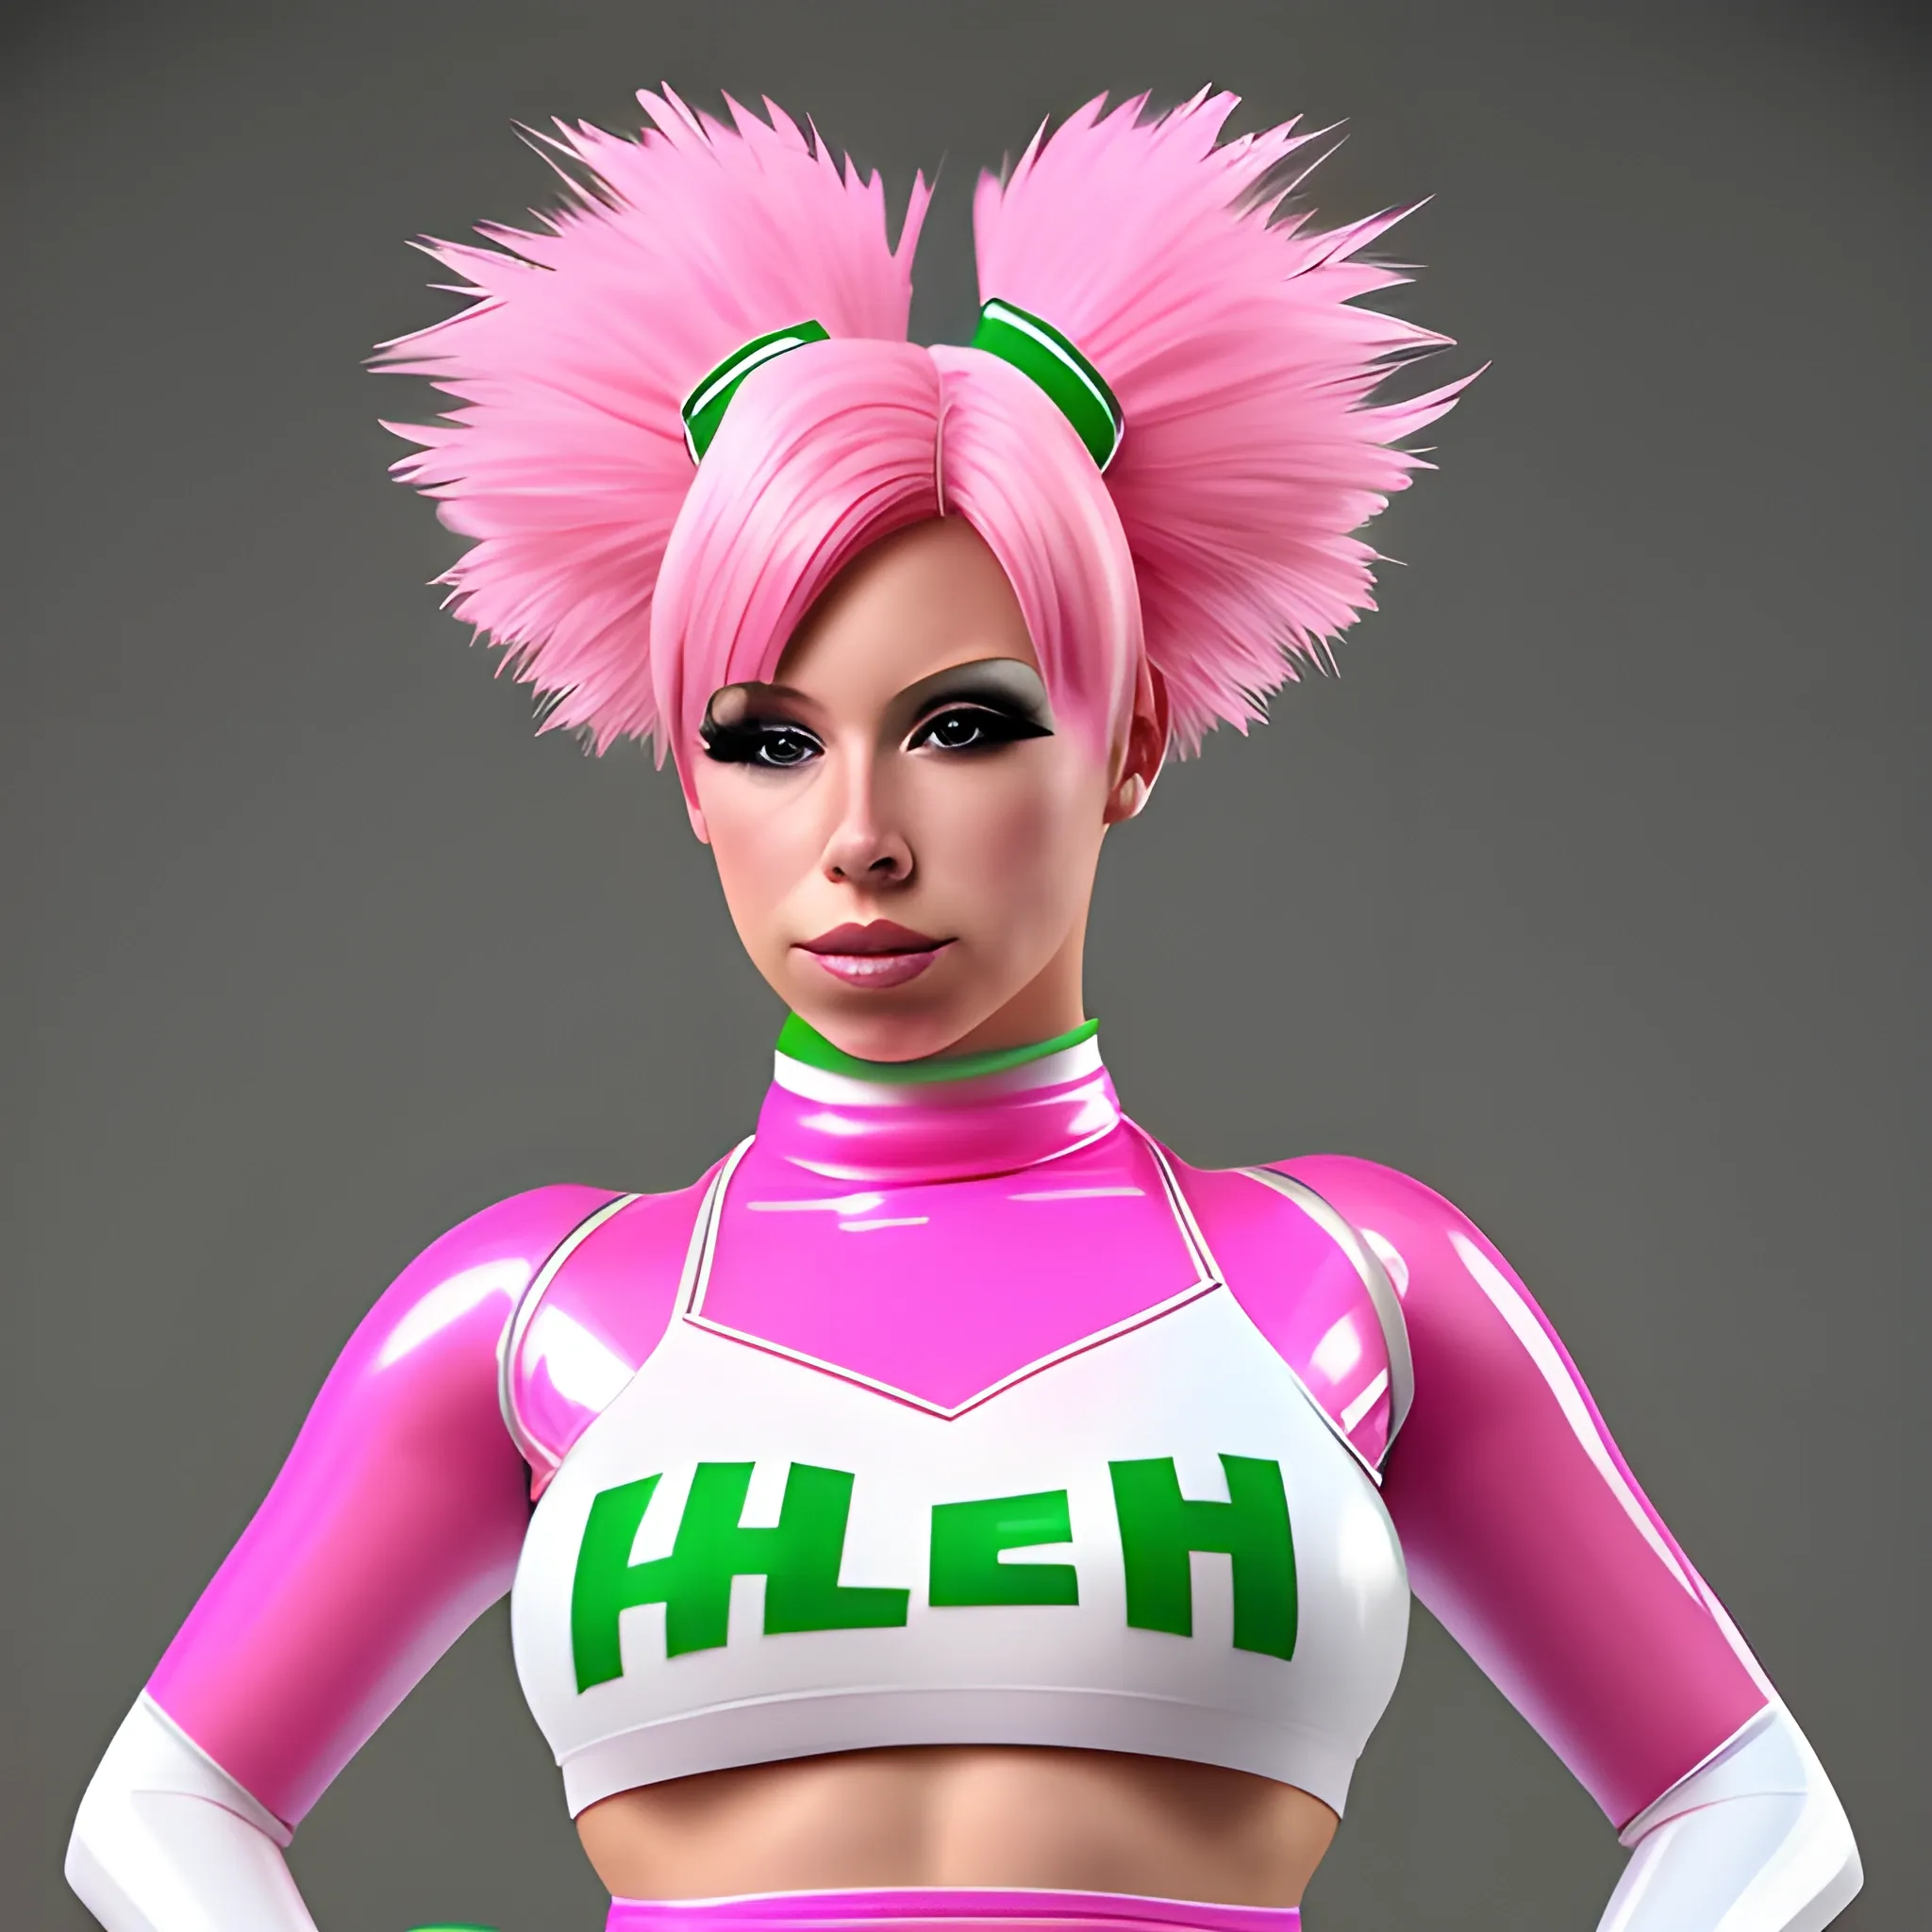 Photorealistic image of a cheerleader with pink hair, the costume made of latex, white on top and green on the bottom. Chest free and visible, high details 